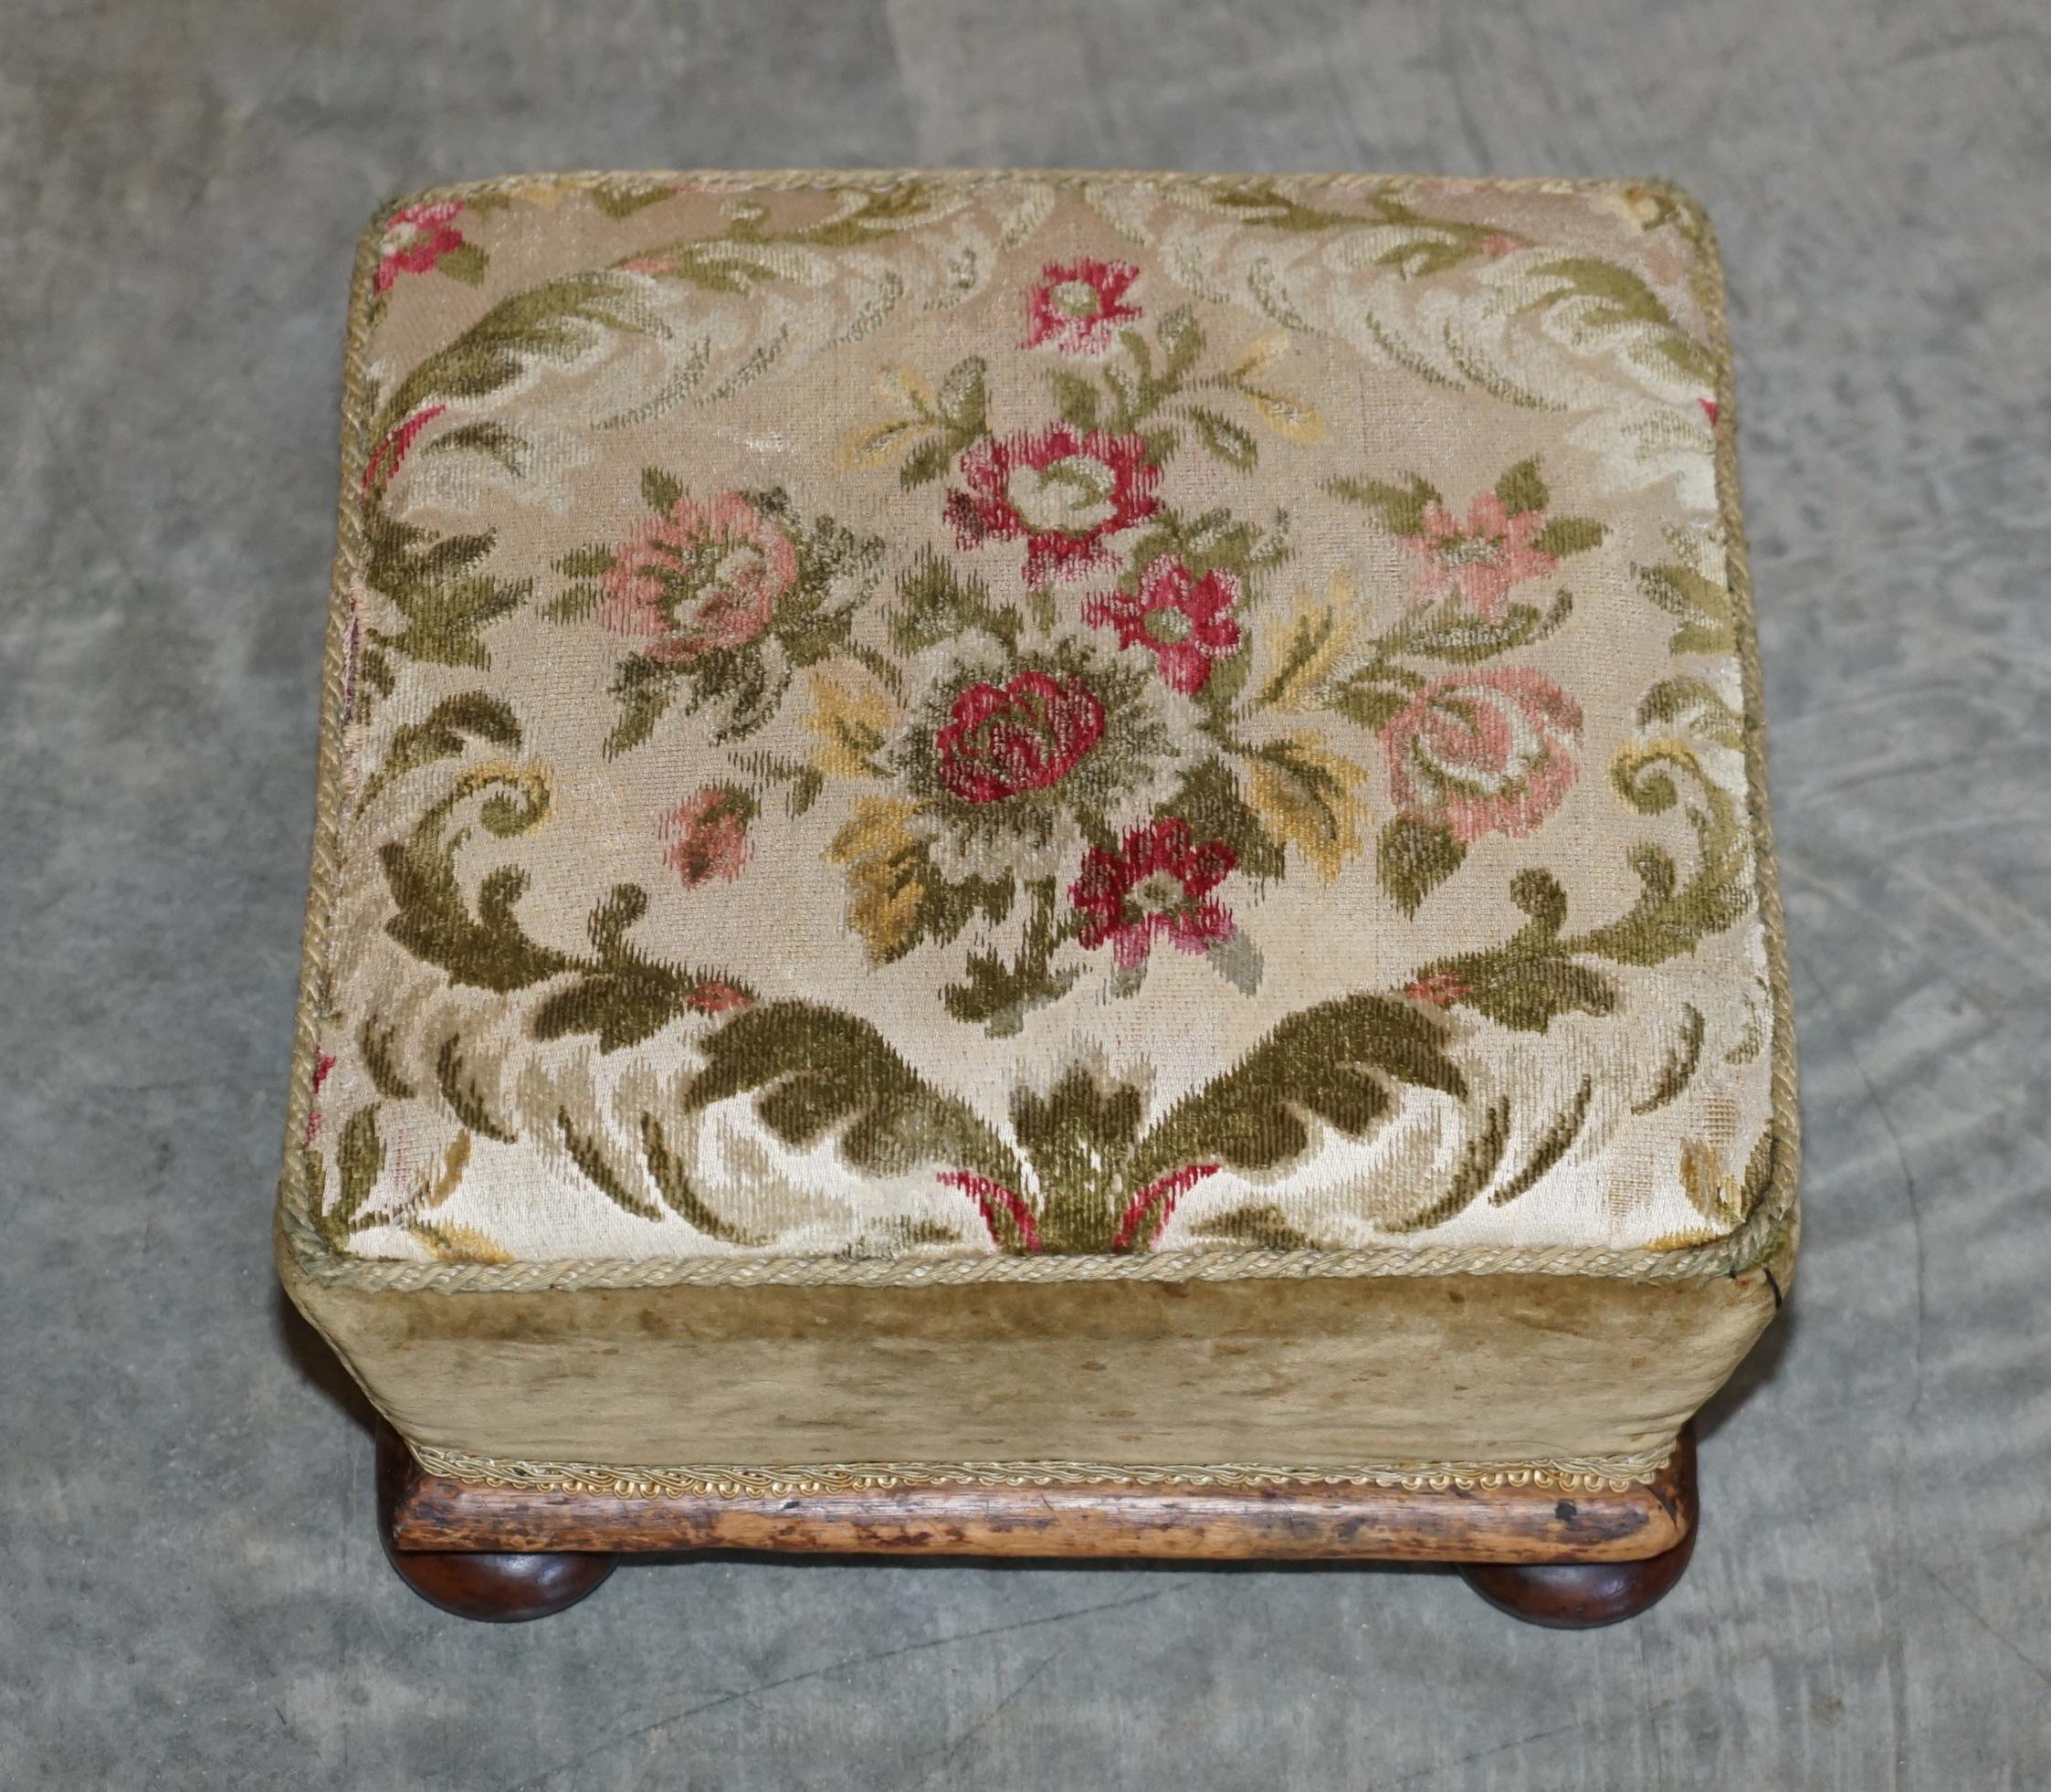 We are delighted to offer for sale this lovely Victorian Walnut with ornately Embroidered top, footstool

A good looking well made and decorative piece, the top has a very floral look and feel to it. 

We have cleaned waxed and polished the